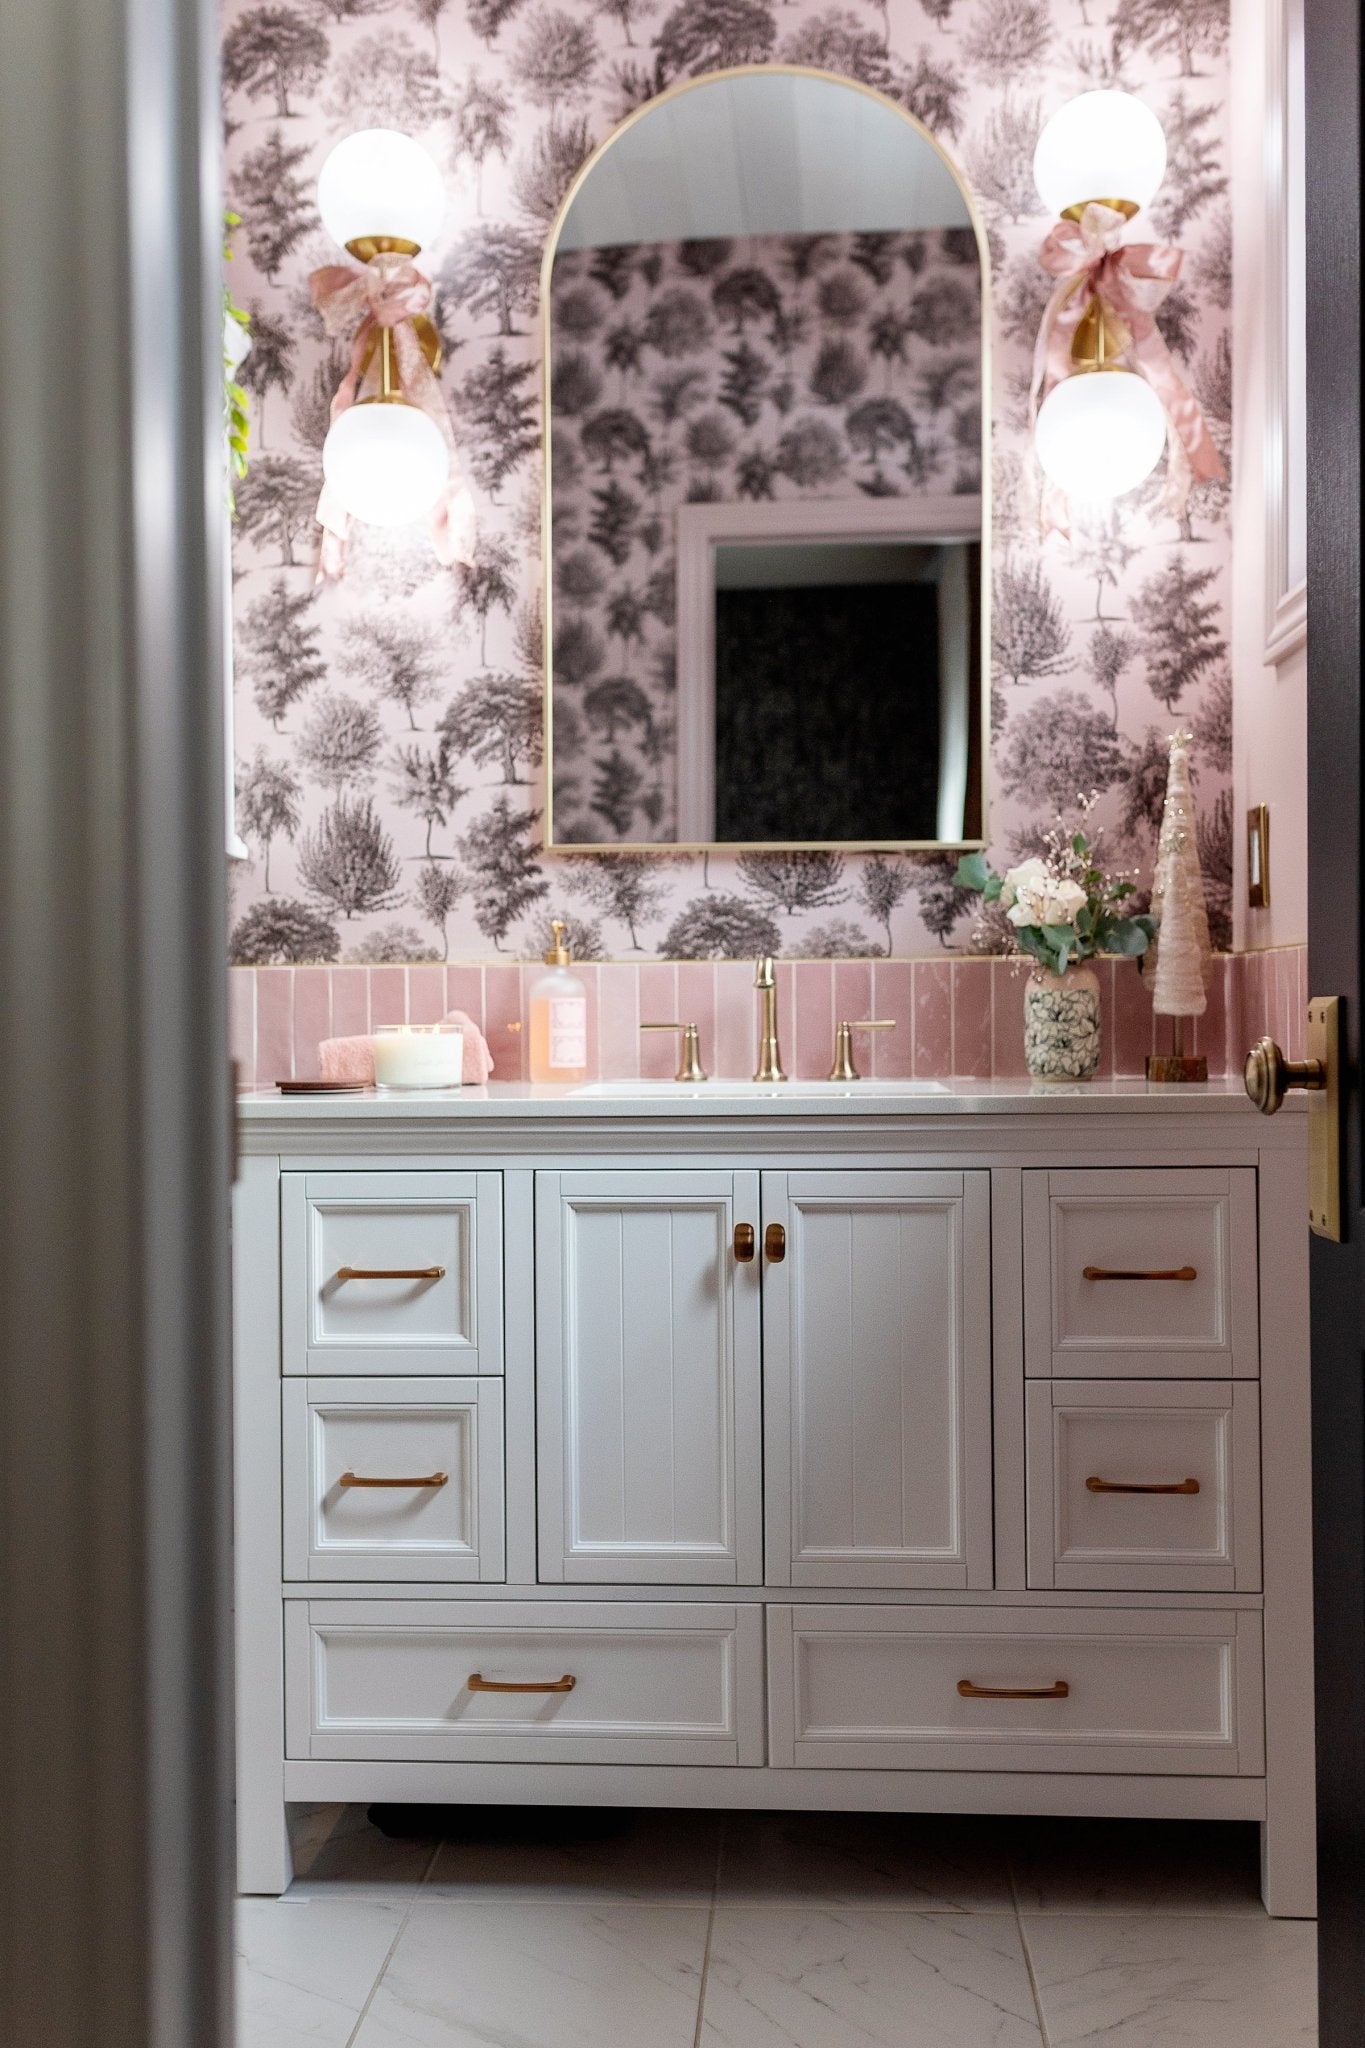 A bathroom vanity with white cabinets, brass handles, and a pink toile tree-pattern wallpaper.